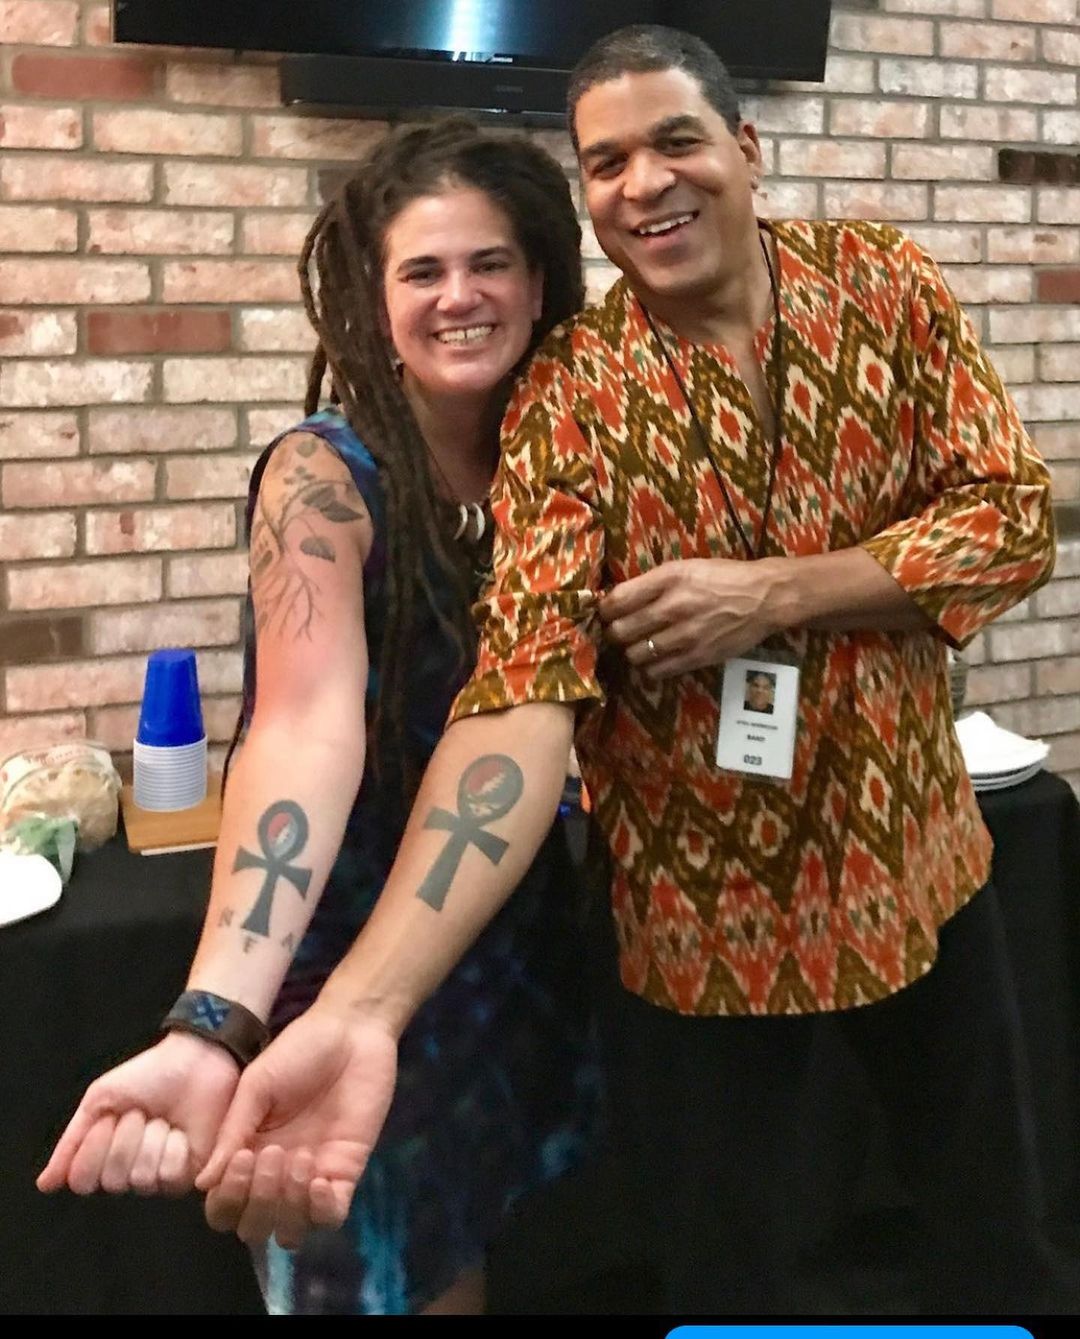 Oteil Burbridge with his friend Ripple. Both showing their matching tattoos.